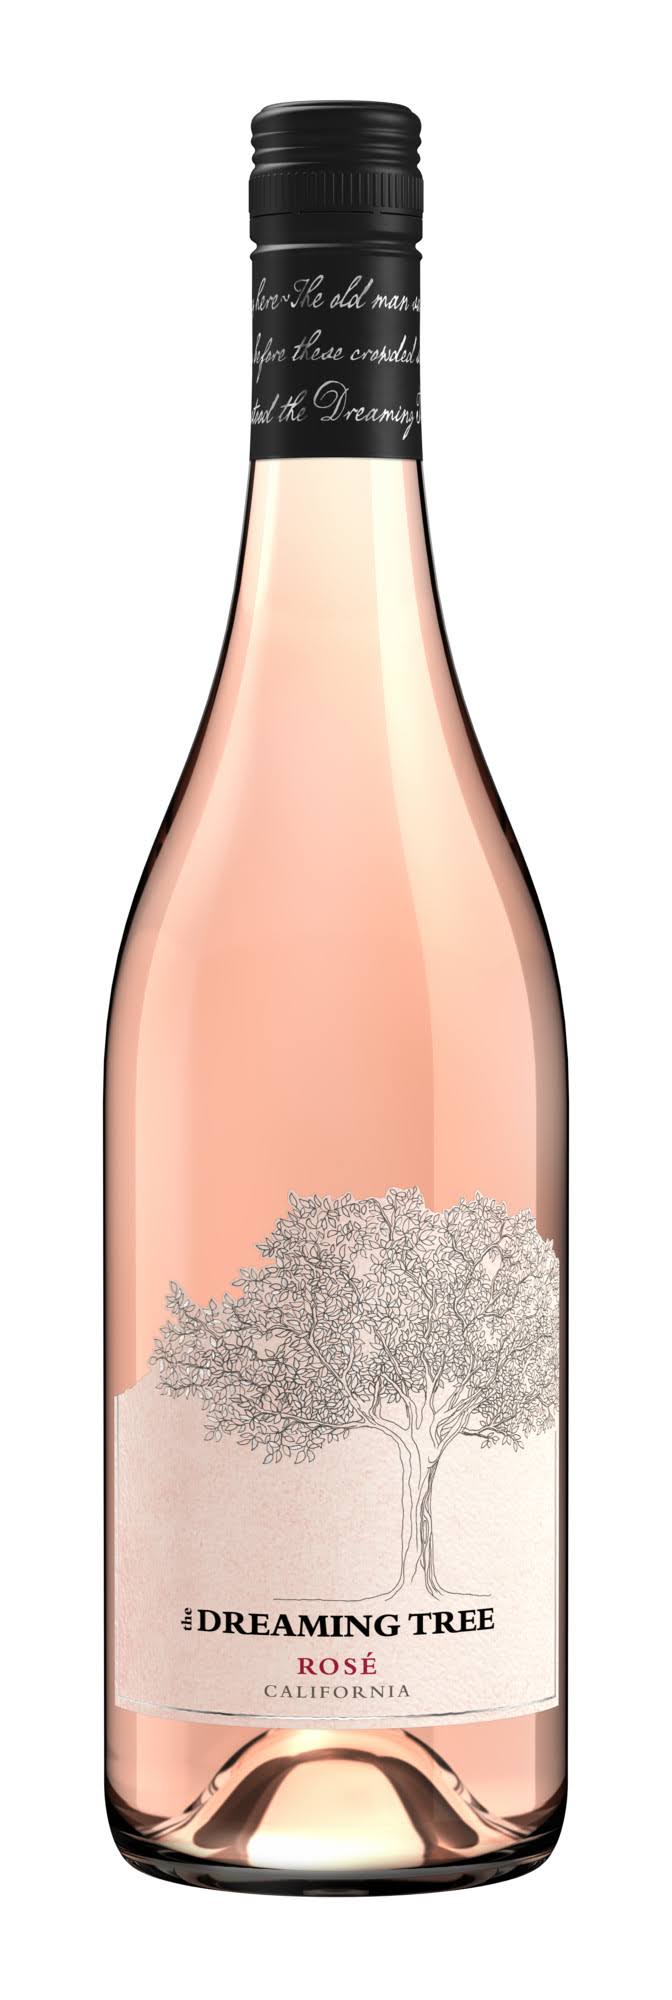 The Dreaming Tree Rose 2019 (750 ml)